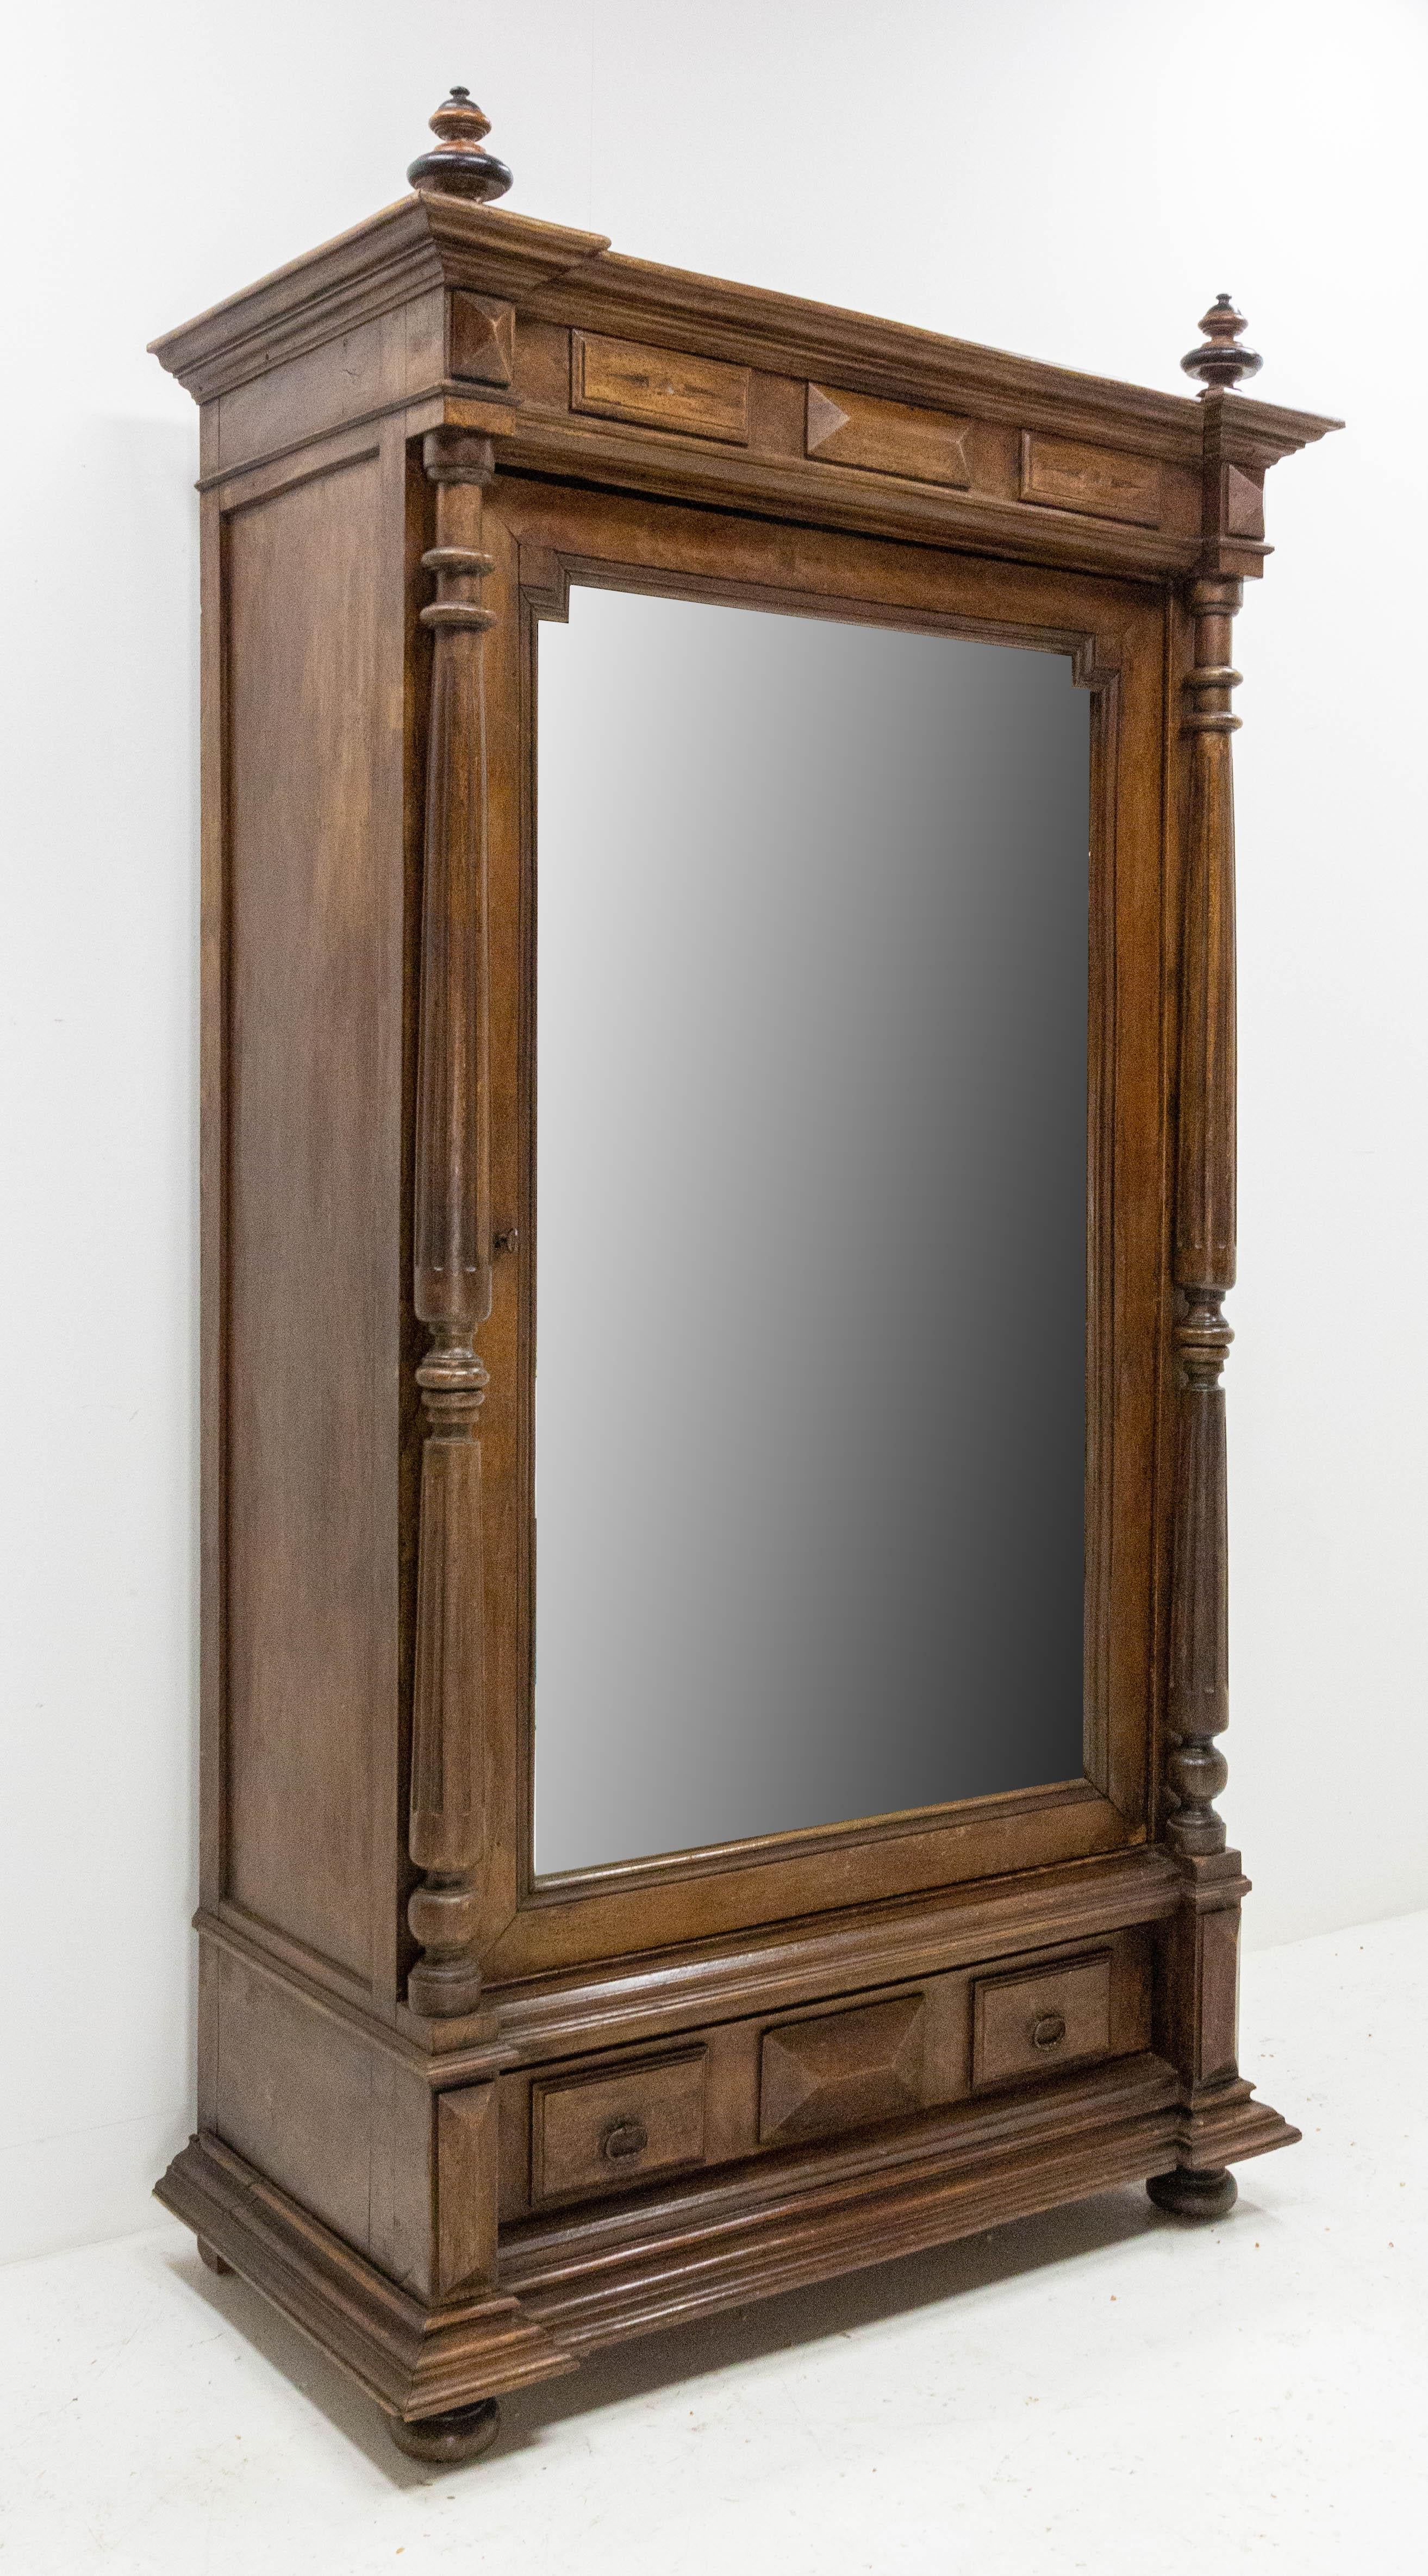 19th century armoire French Second Empire with columns
Mirror door
Three shelves and two hanging drawers
One big drawer
Shelves are all removable in height to create hanging space
Original mirrored door
Good antique condition solid and sound